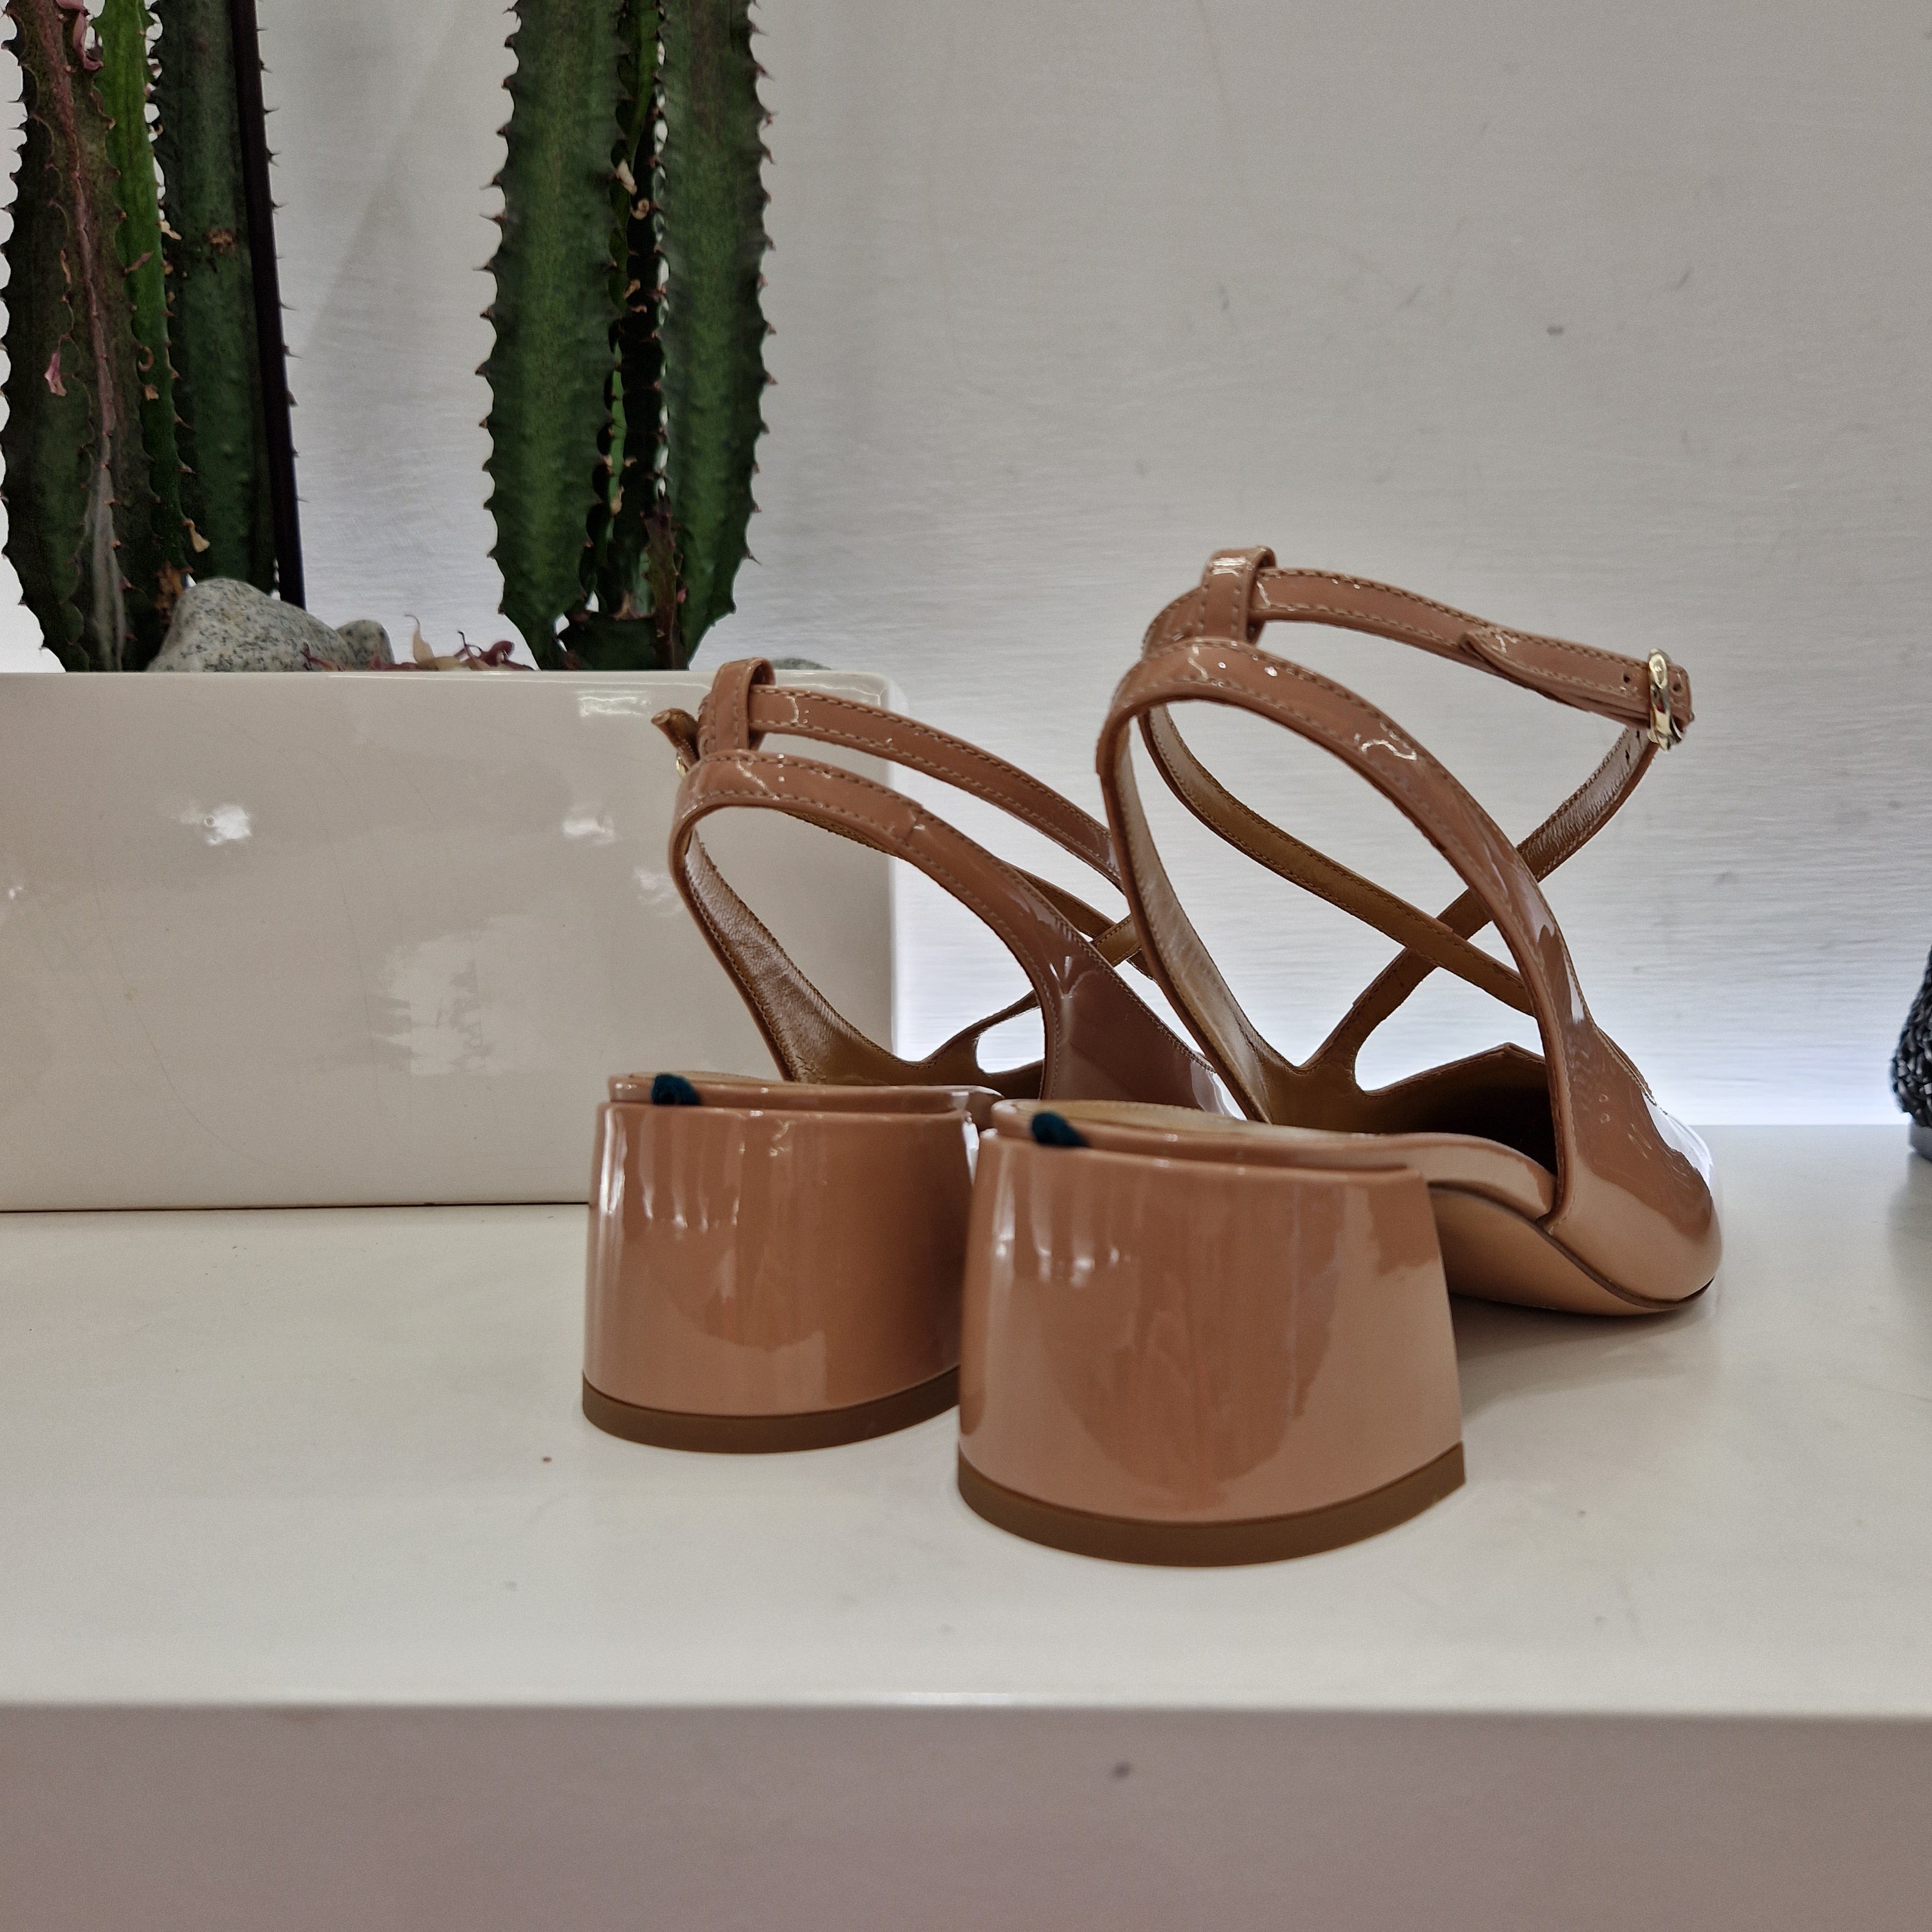 A.Bocca sling back nude